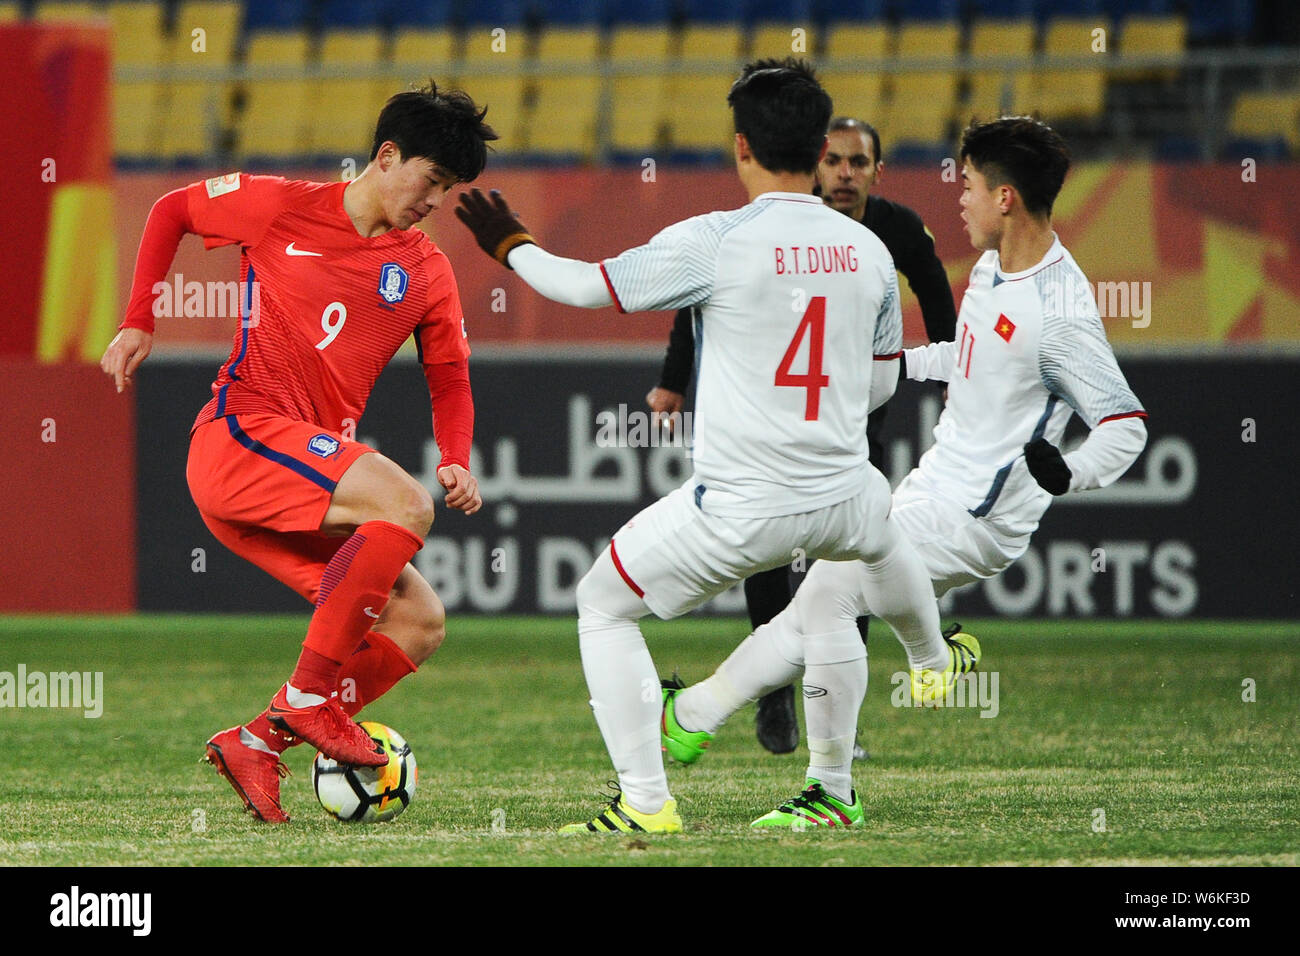 Lee Keun Ho, left, of South Korea kicks the ball to make a pass against Bui Tien Dung and Do Duy Manh of Vietnam in their Group D match during the 201 Stock Photo